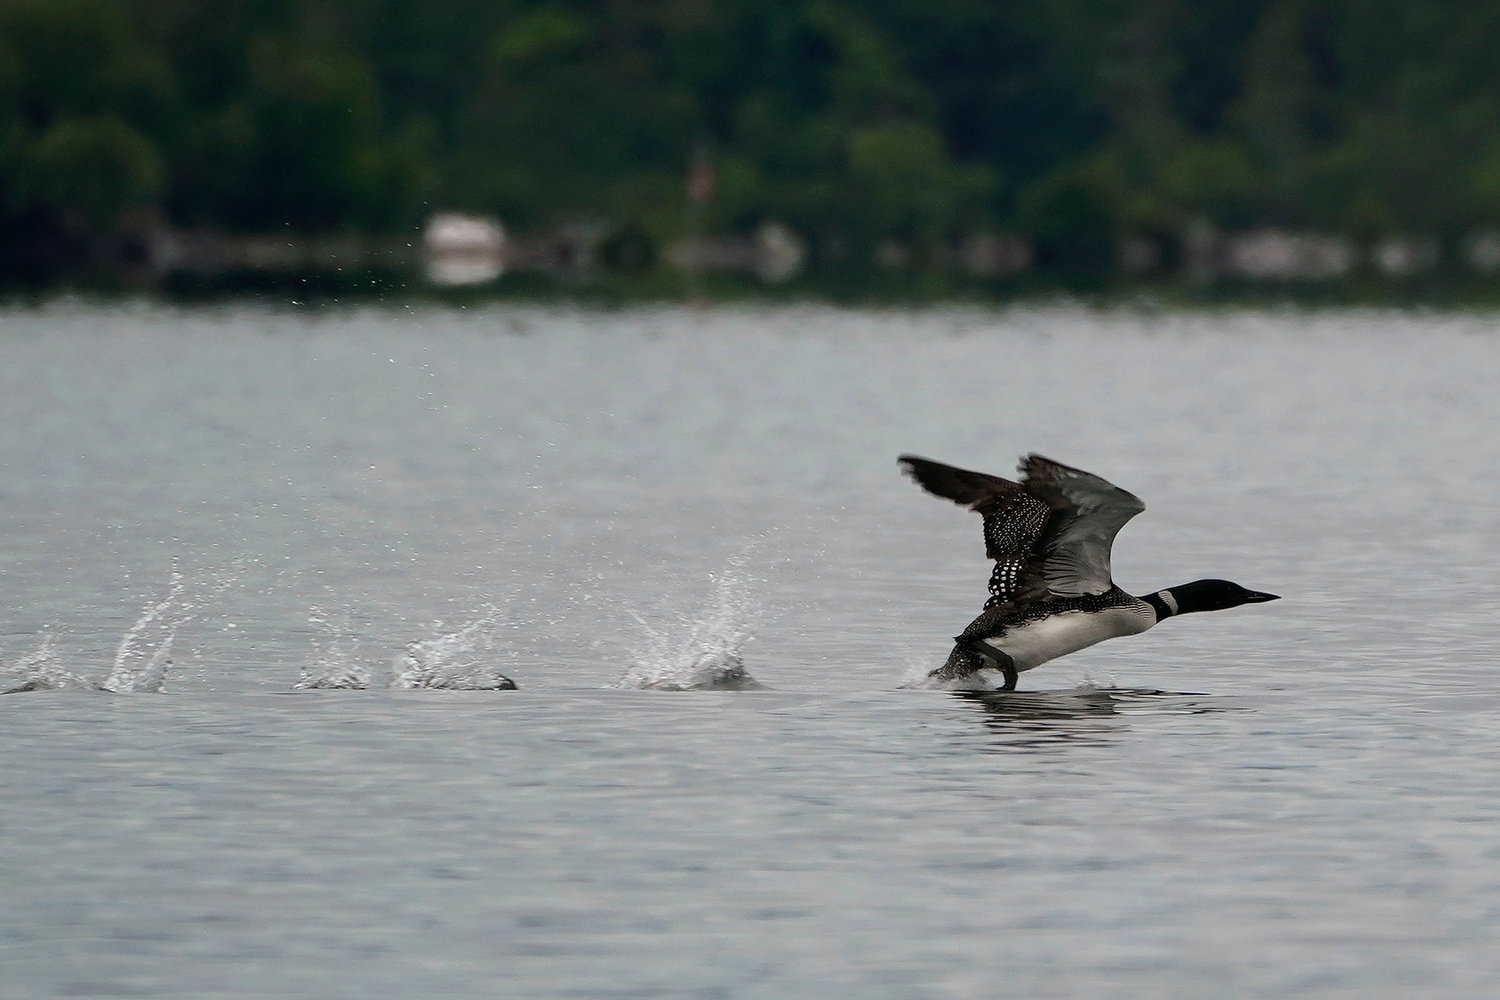 A loon takes flight on Squam Lake, Friday, June 25, 2021, in Holderness, N.H. Researchers in New Hampshire have long struggled to understand why loon numbers have stagnated on the lake, despite a robust effort to protect them. They are investigating whether contamination from PCBs could be the culprit and believe oil laced with the chemicals was used on nearby dirt roads decades ago. (AP Photo/Elise Amendola)